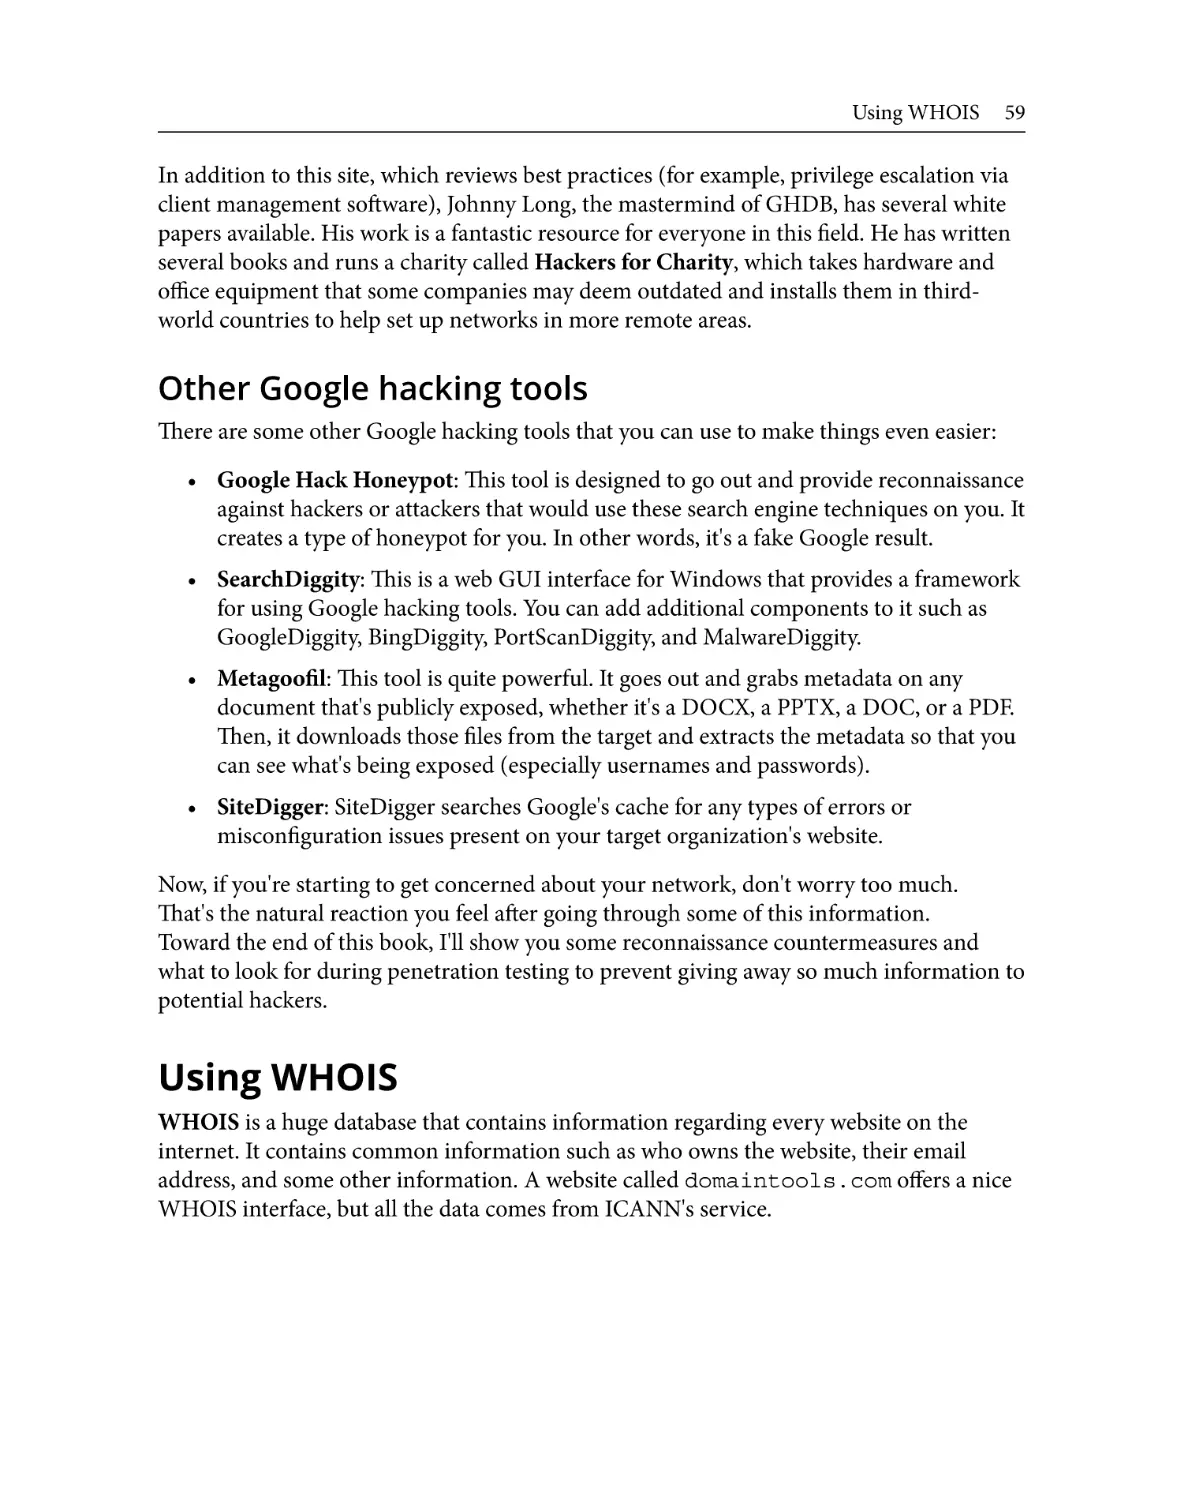 Other Google hacking tools
Using WHOIS